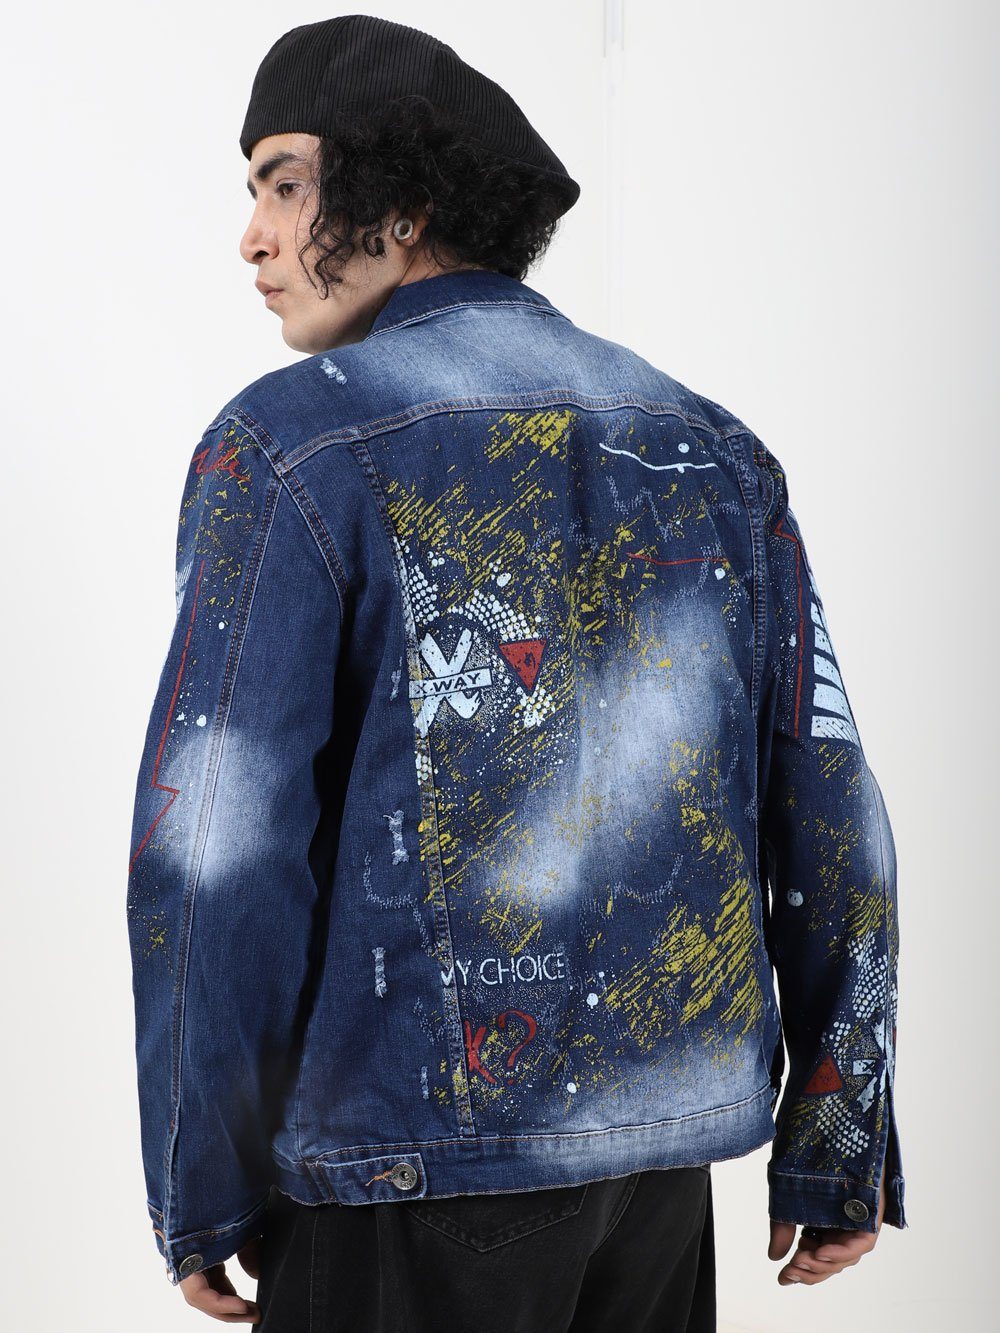 The back of a man wearing an OLD PAINTING denim jacket with graffiti on it.